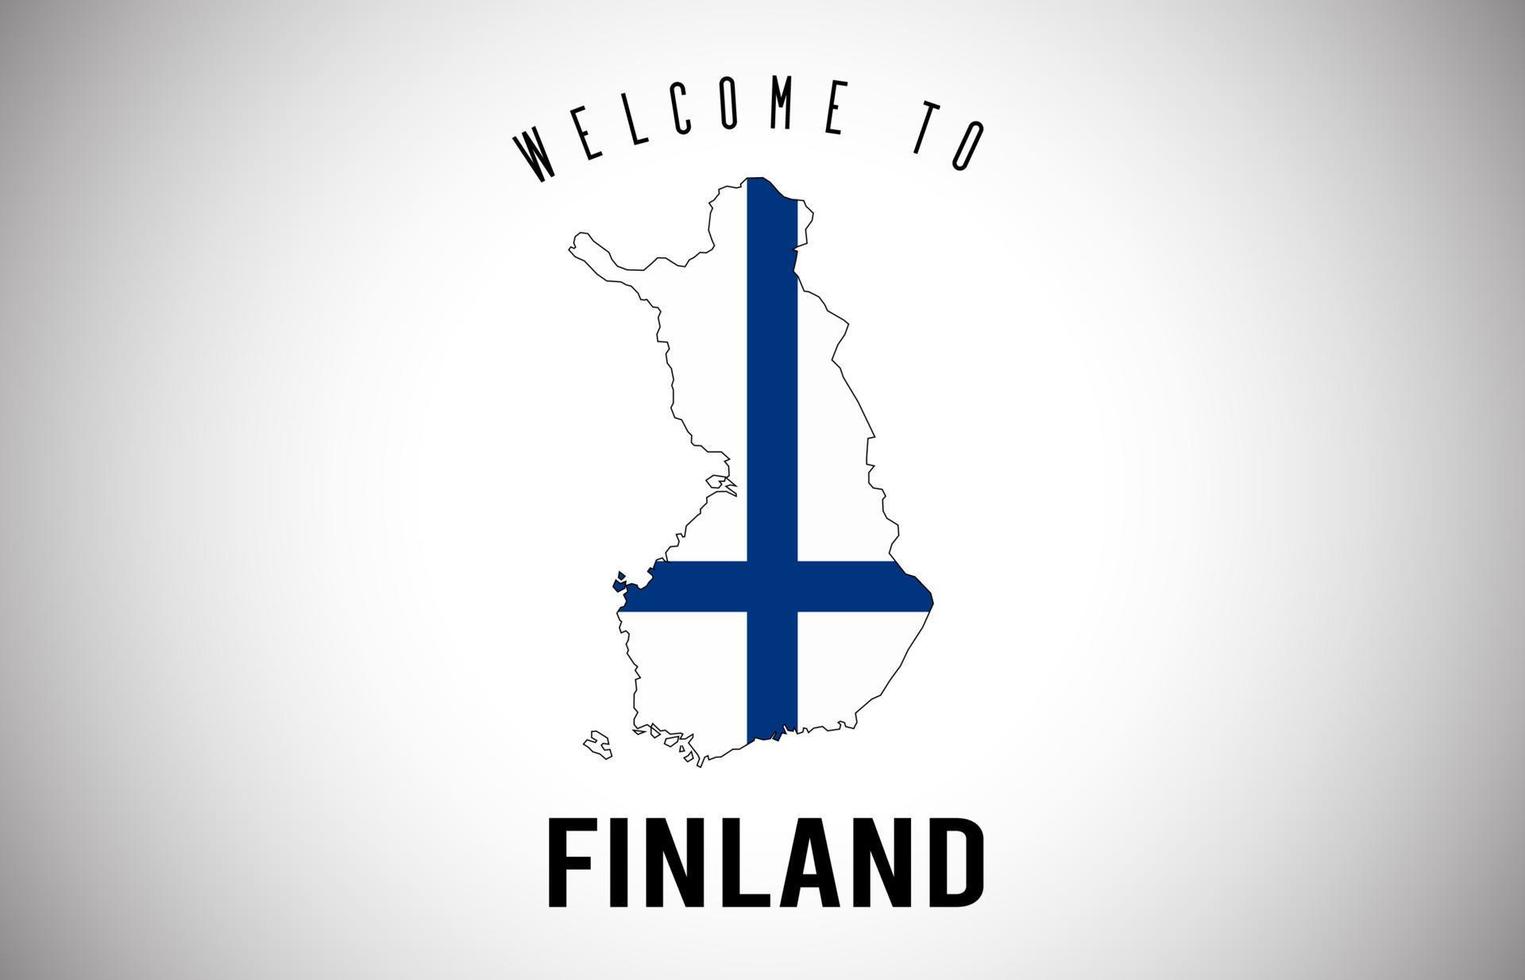 Finland Welcome to Text and Country flag inside Country border Map Vector Design.